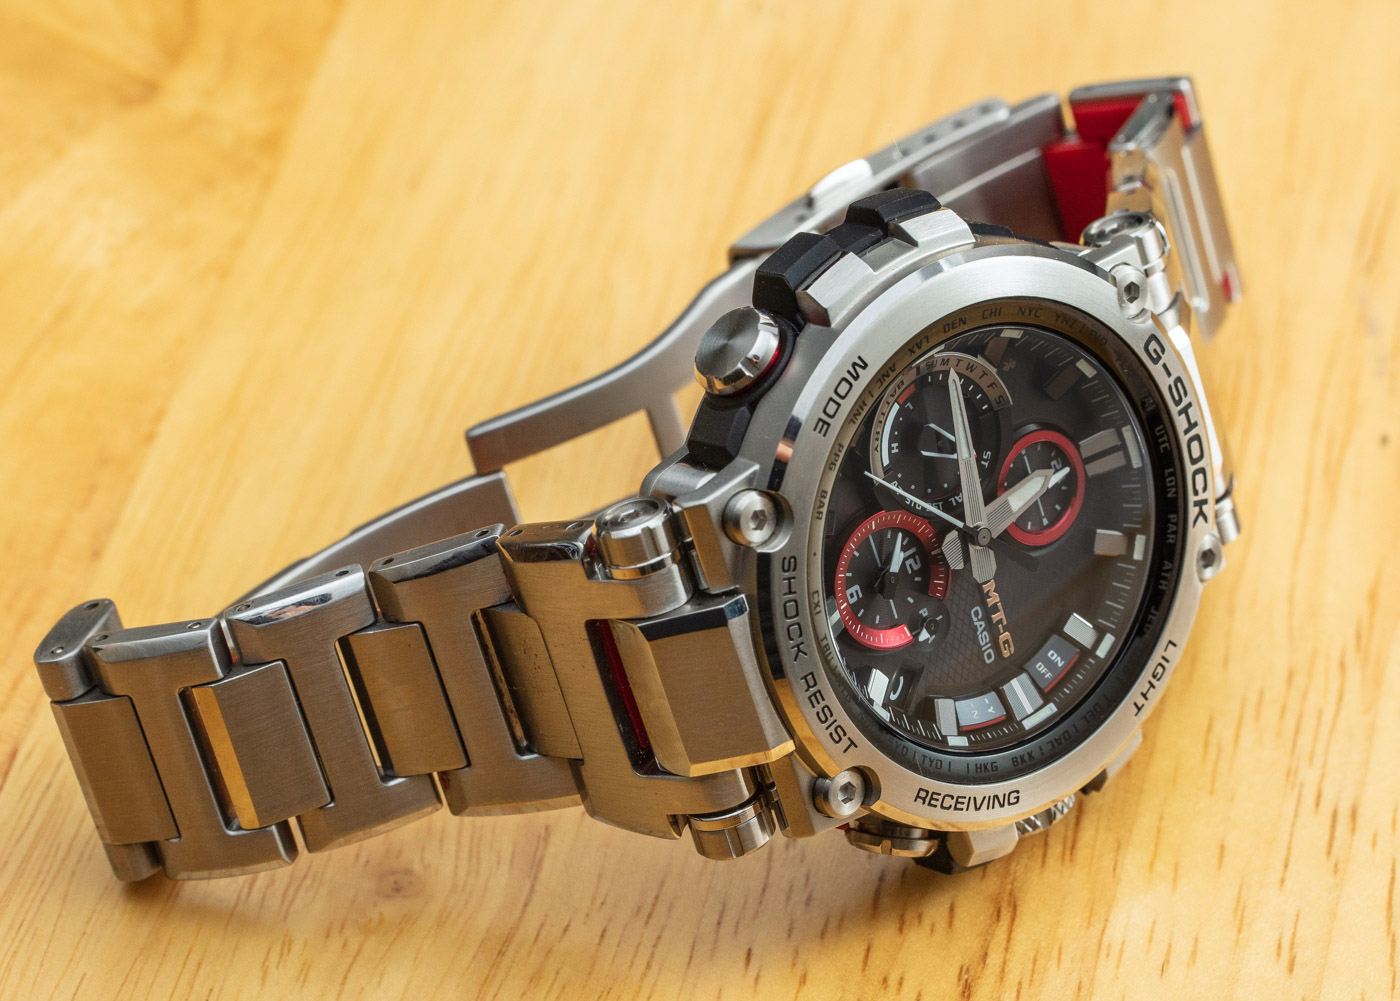 Casio G-Shock MT-G MTGB1000D-1A Watch Review: Metal With Modern